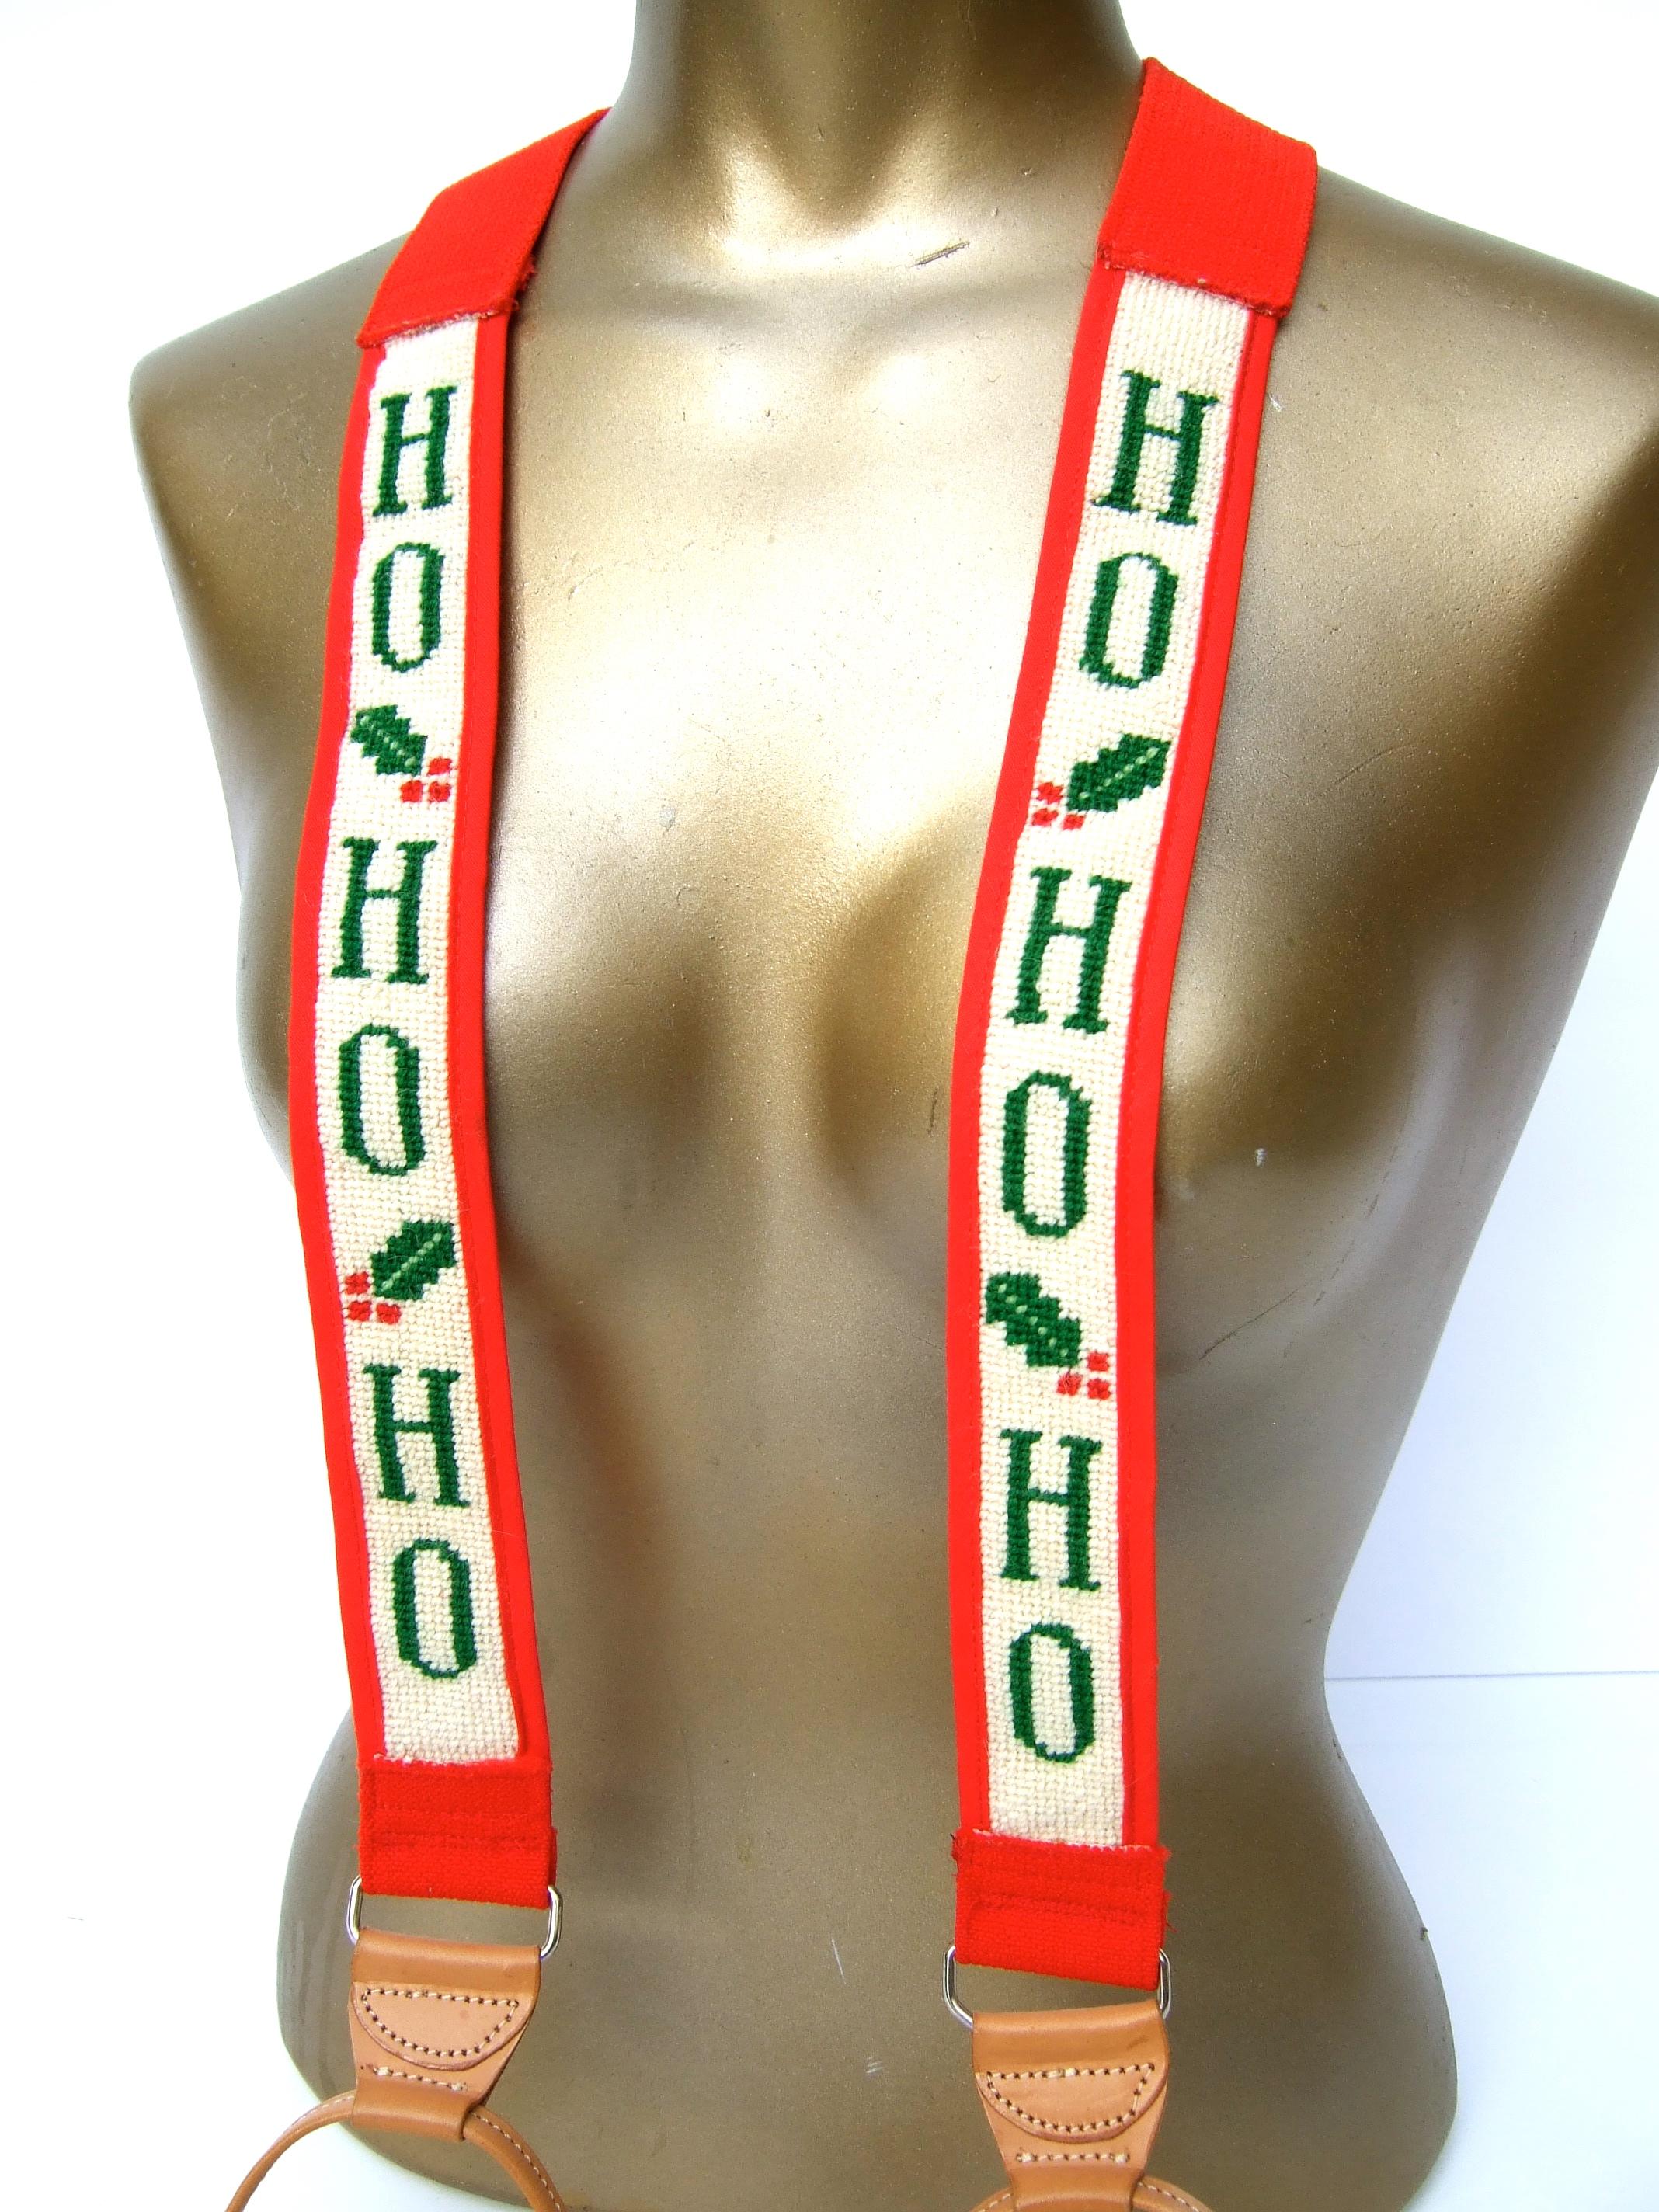 Whimsical needlepoint Christmas themed holiday suspenders c 1980s
The charming hand-stitched unisex suspenders have needlepoint panels designed with mistletoe and the Ho-Ho-Ho jingle 

The solid red section of the suspenders is constructed with